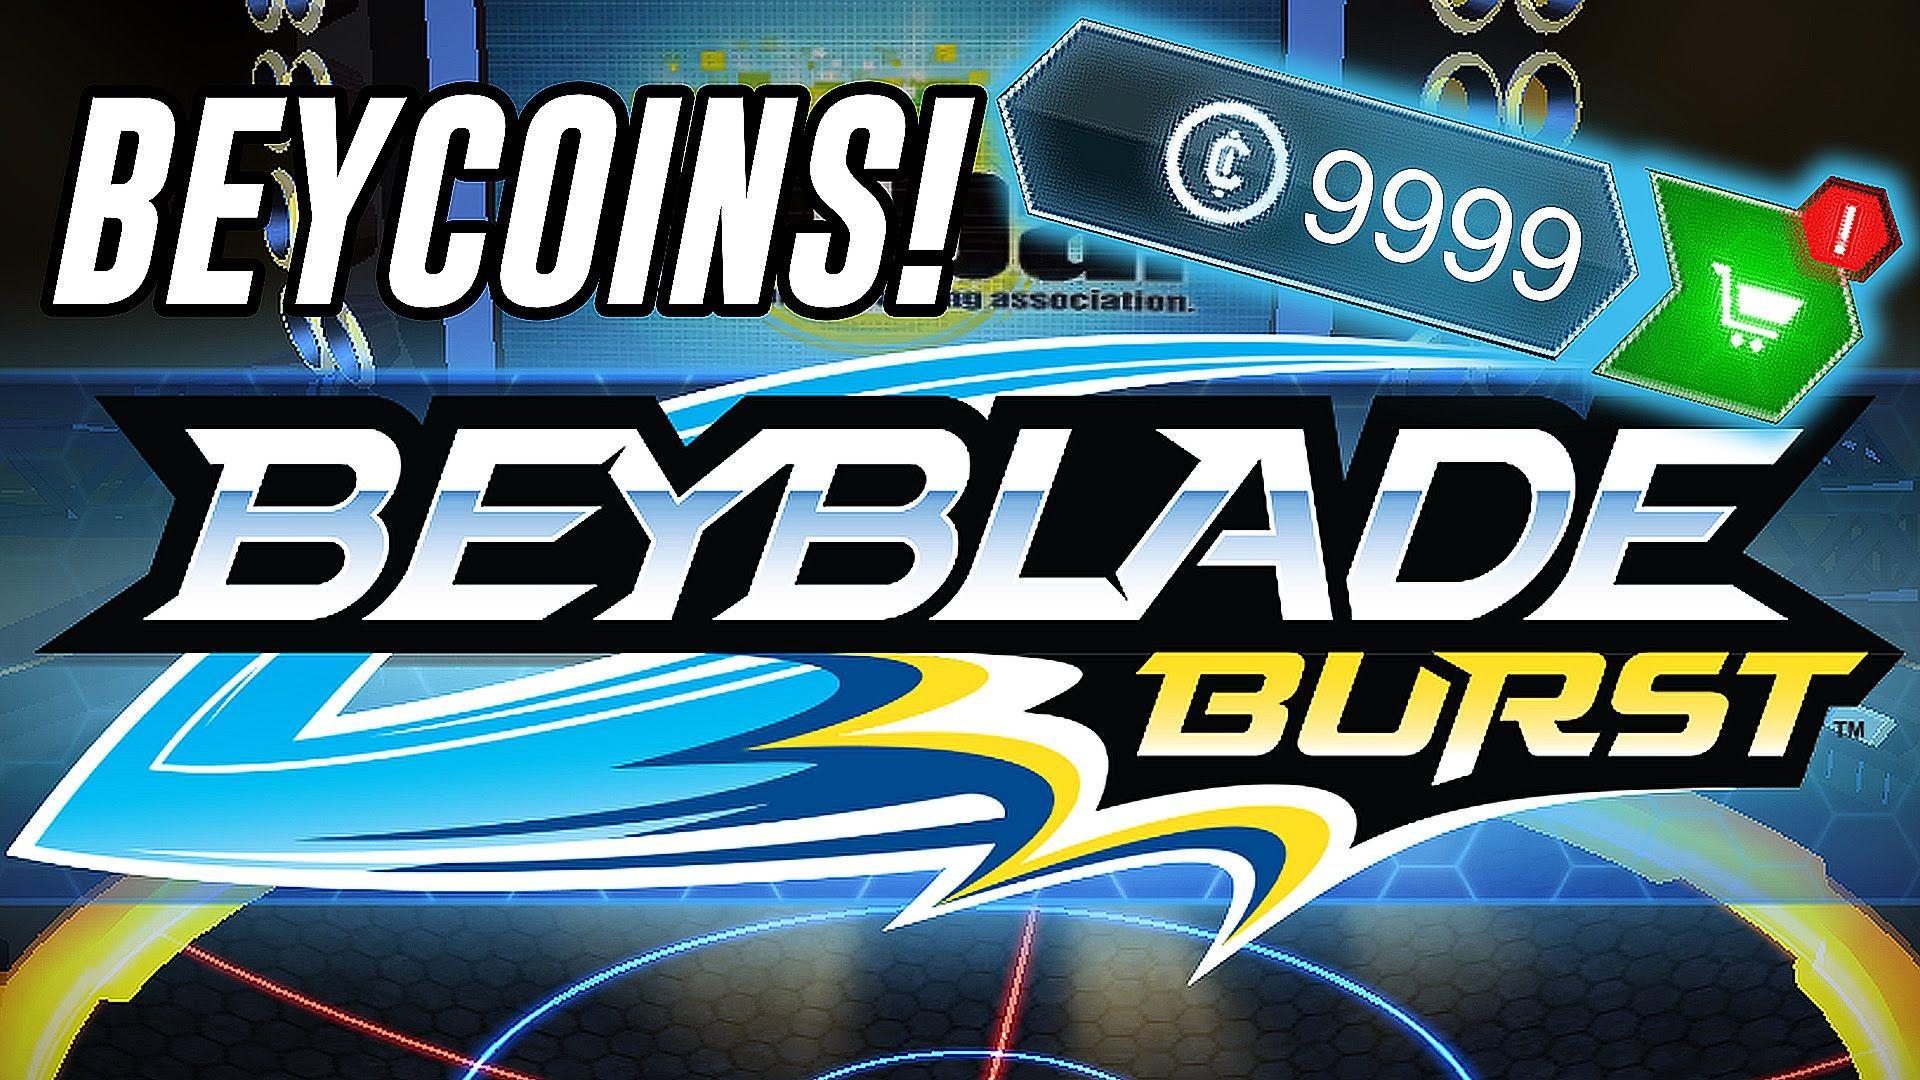 How to get UNLIMITED BEYCOINS in the Beyblade Burst APP!